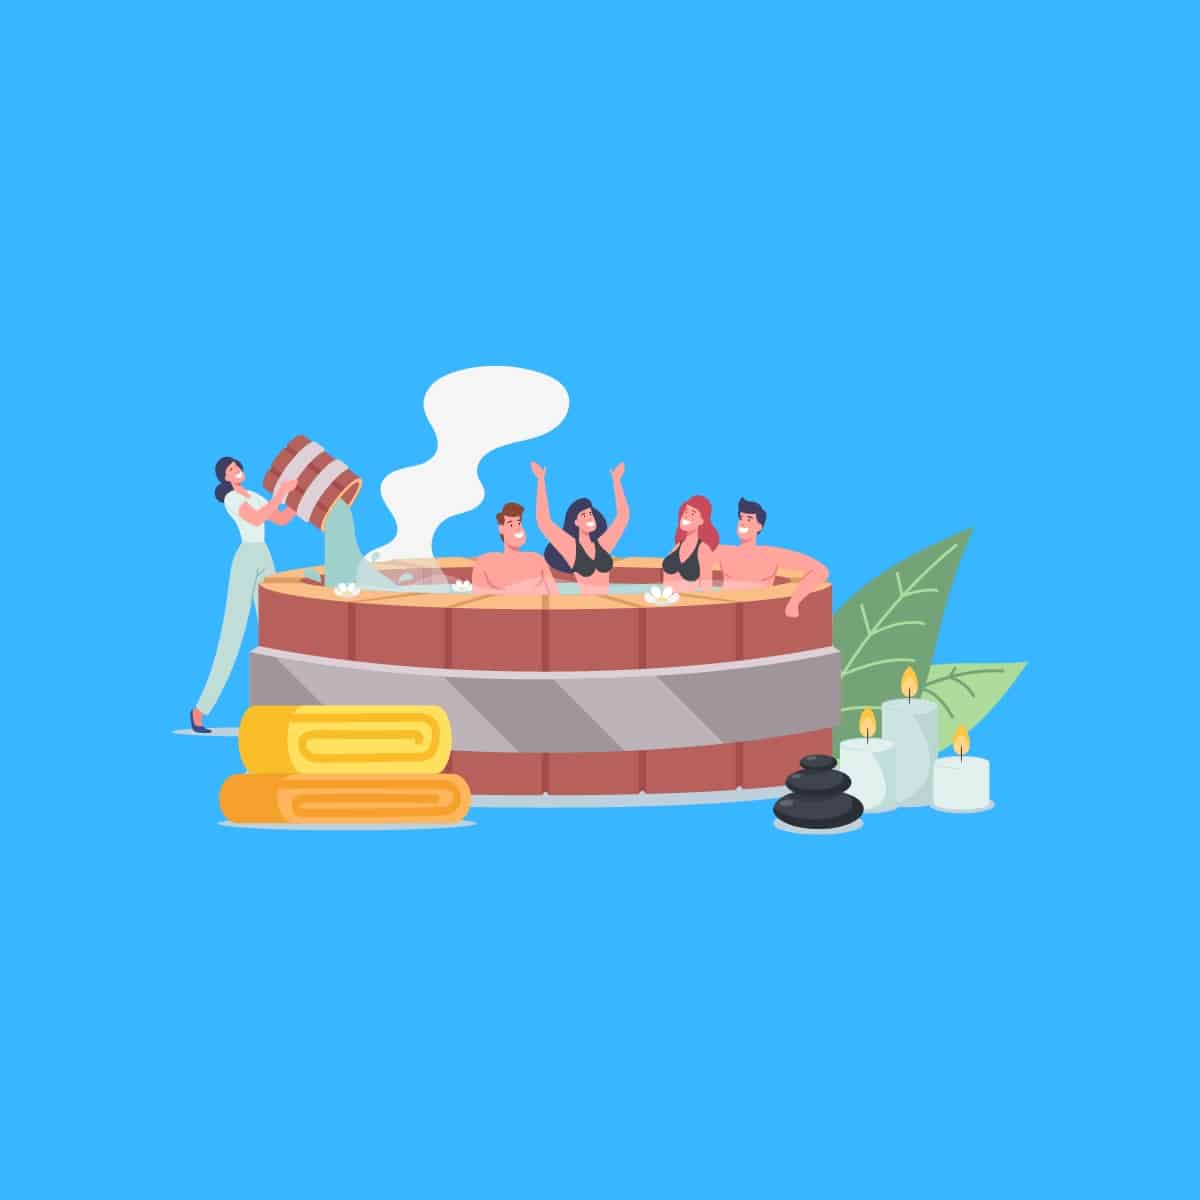 Cartoon graphic of a group of friends in a large hot tub on a blue background.